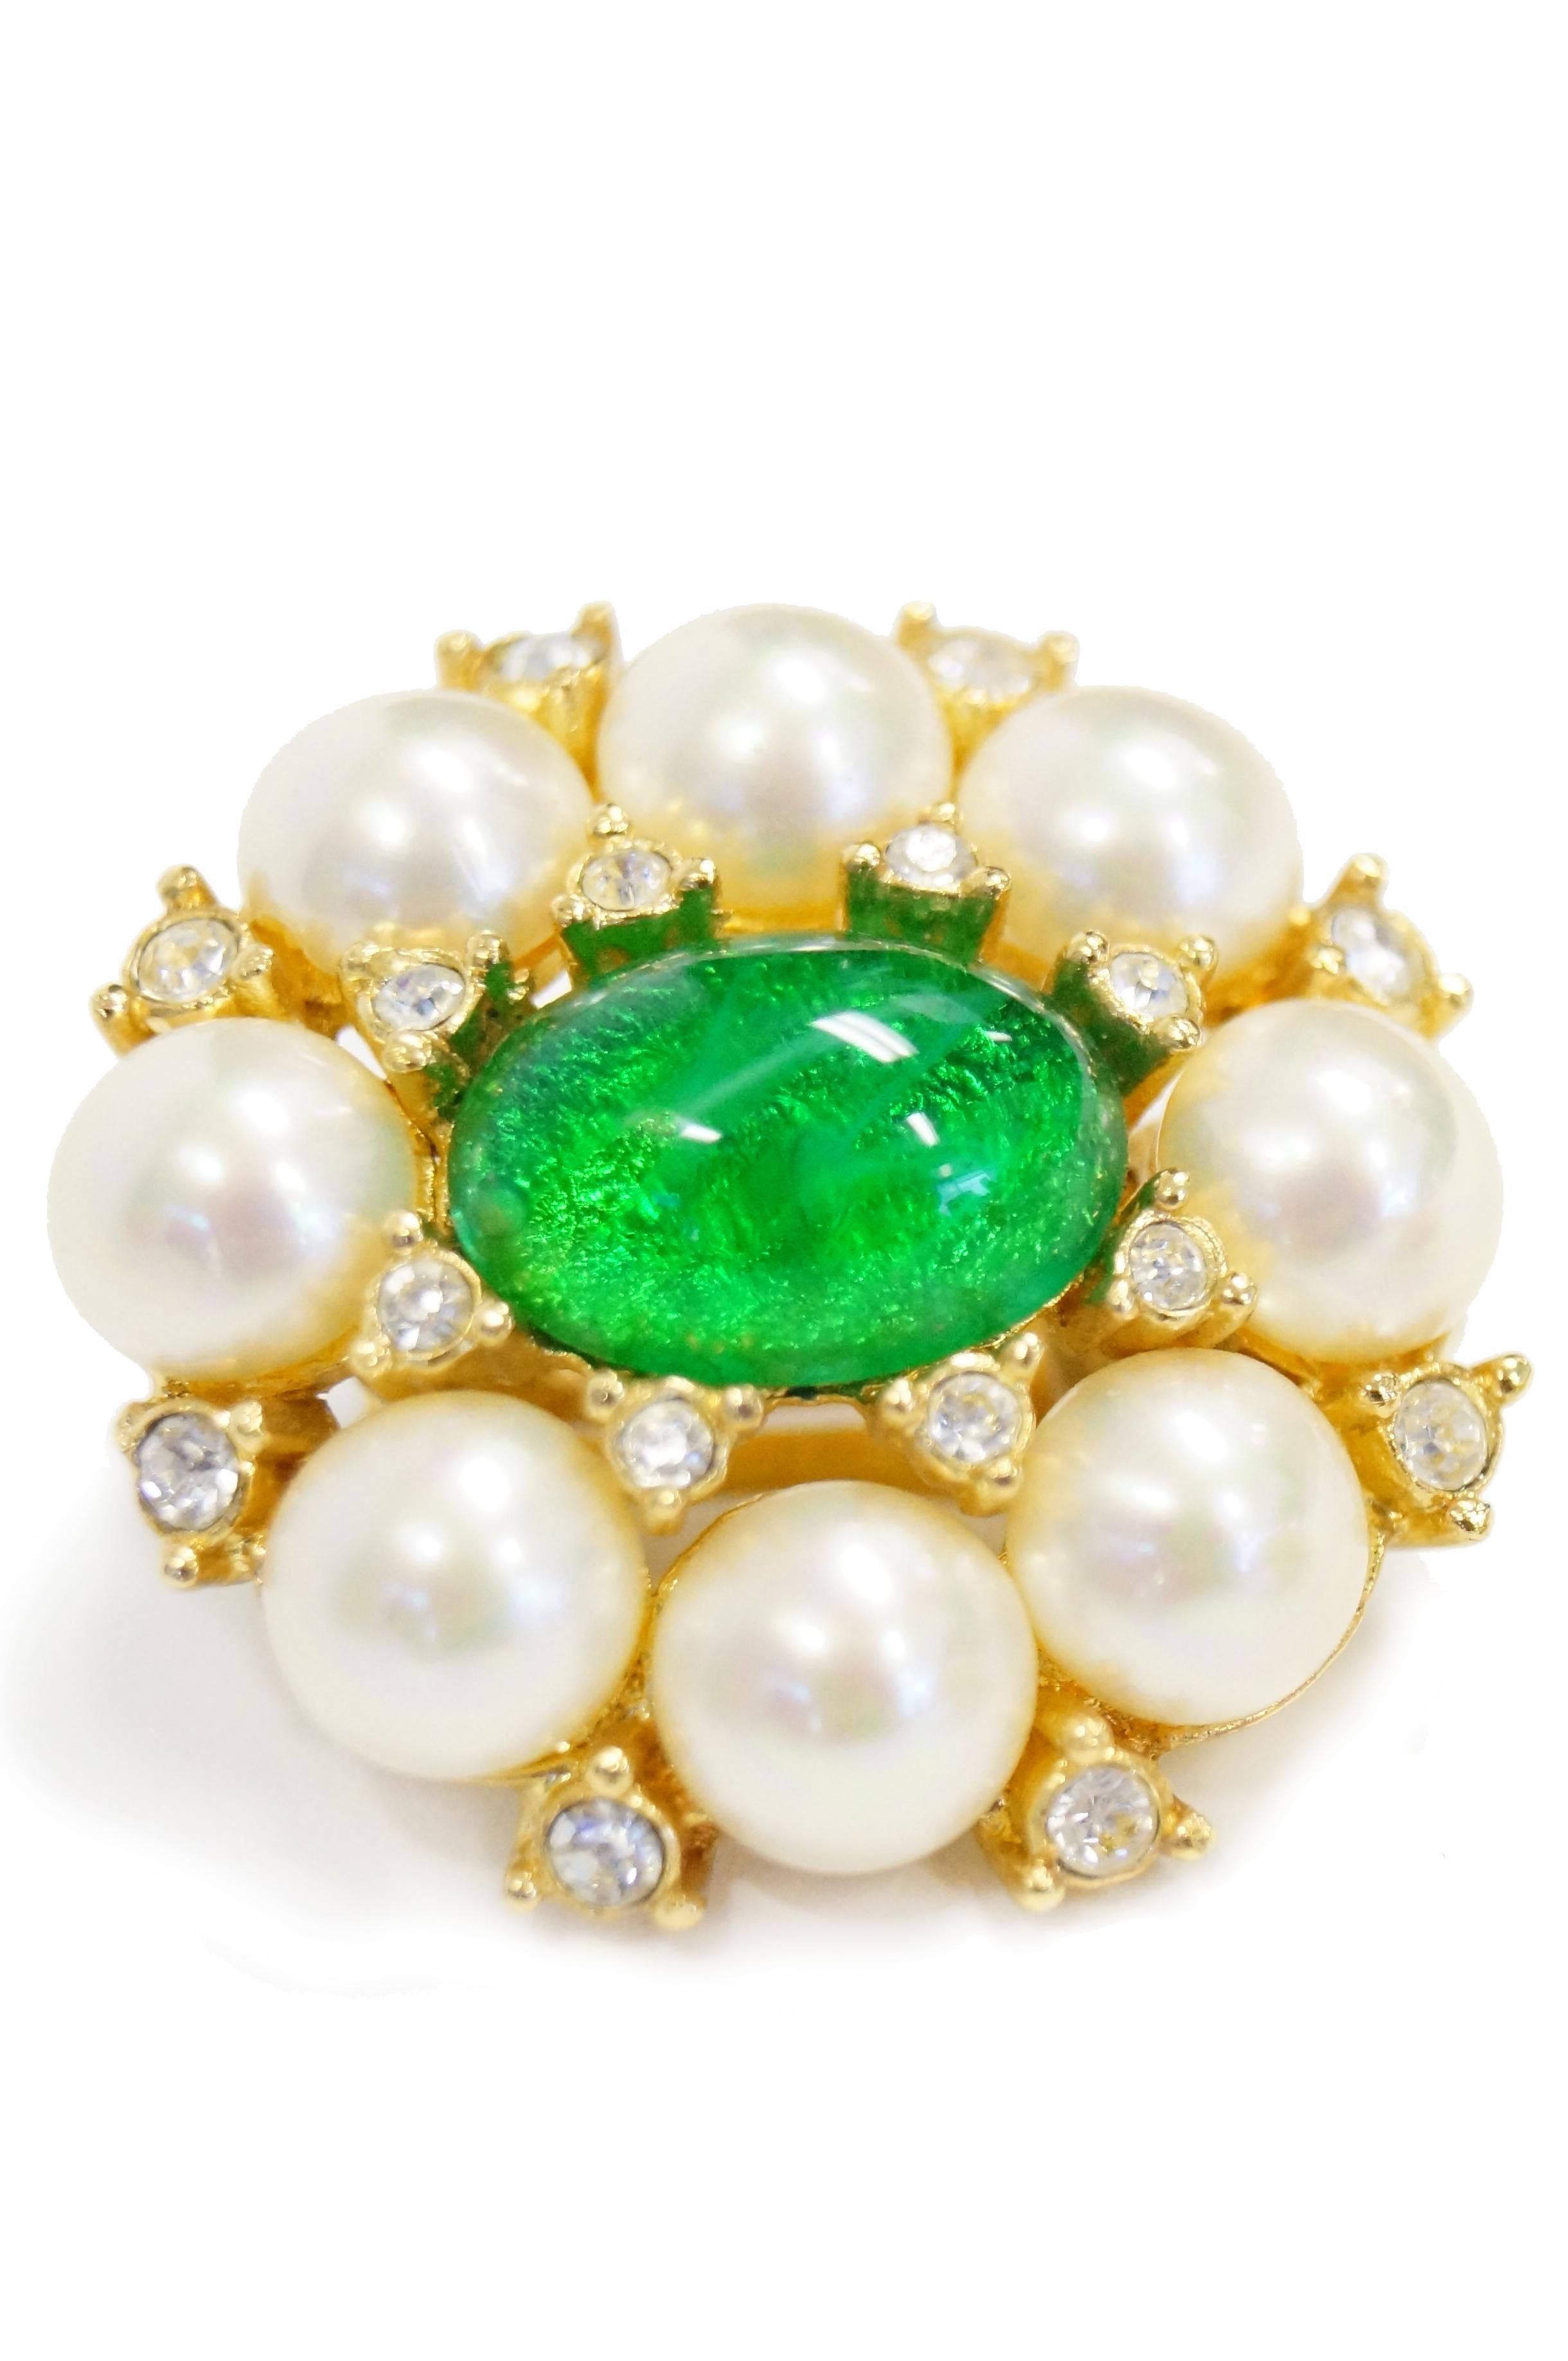 Magnificent Dior green poured glass and faux pearl and rhinestone clip on earrings (Germany). Faux pearls are set into a gold tone foundation with a large green poured glass center all surrounded with clear rhinestones.

1.5 X 1.25 inches
10 Grams